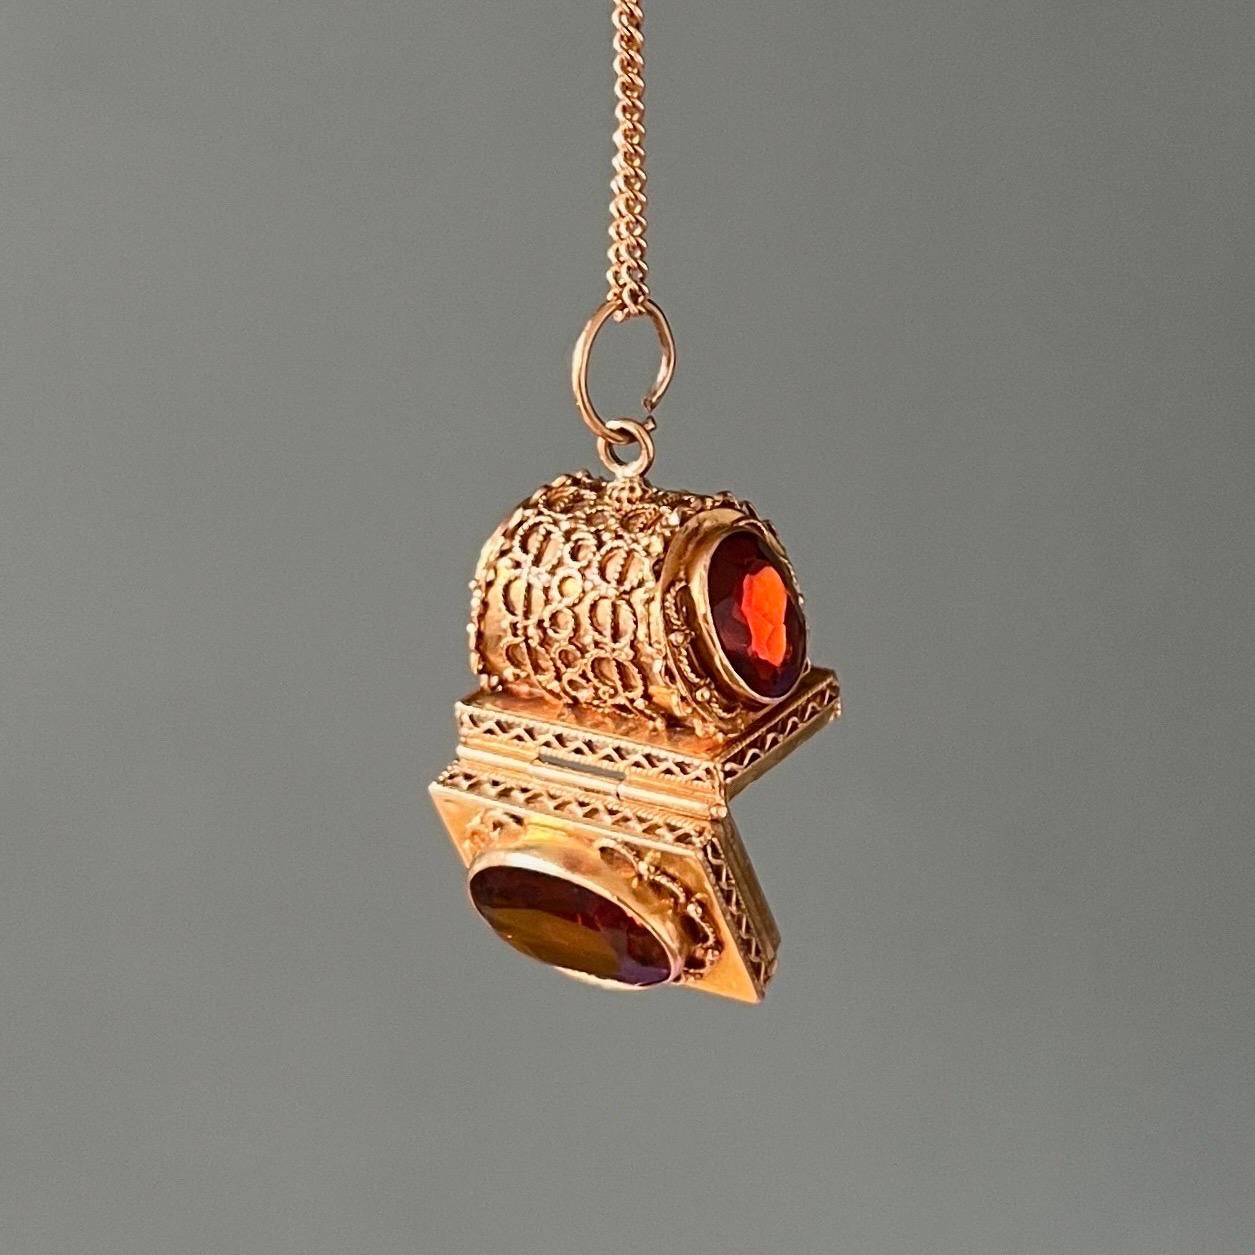 Vintage Venetian Revival 18K Gold and Garnet Locket Pendant In Good Condition For Sale In Rotterdam, NL